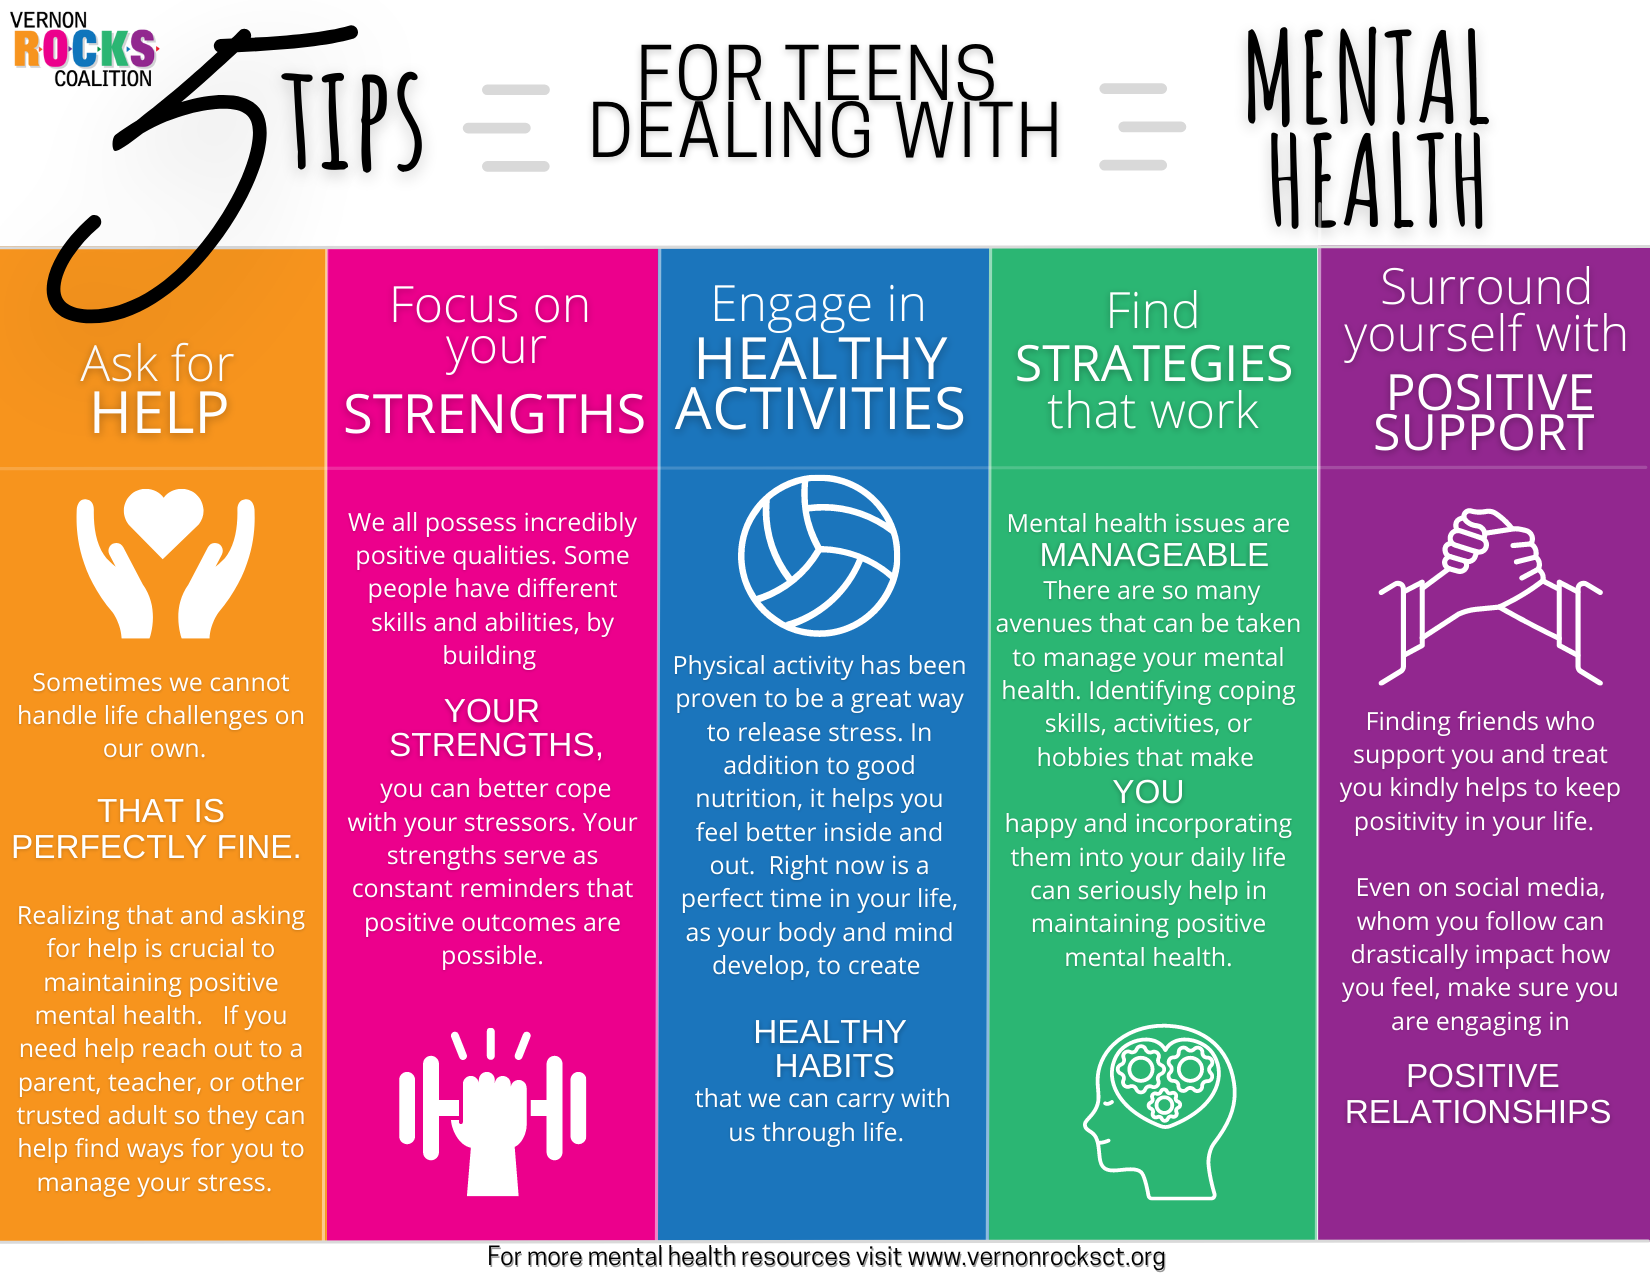 How to Help Teens Guide Their Friends in Need of Mental Health Resources